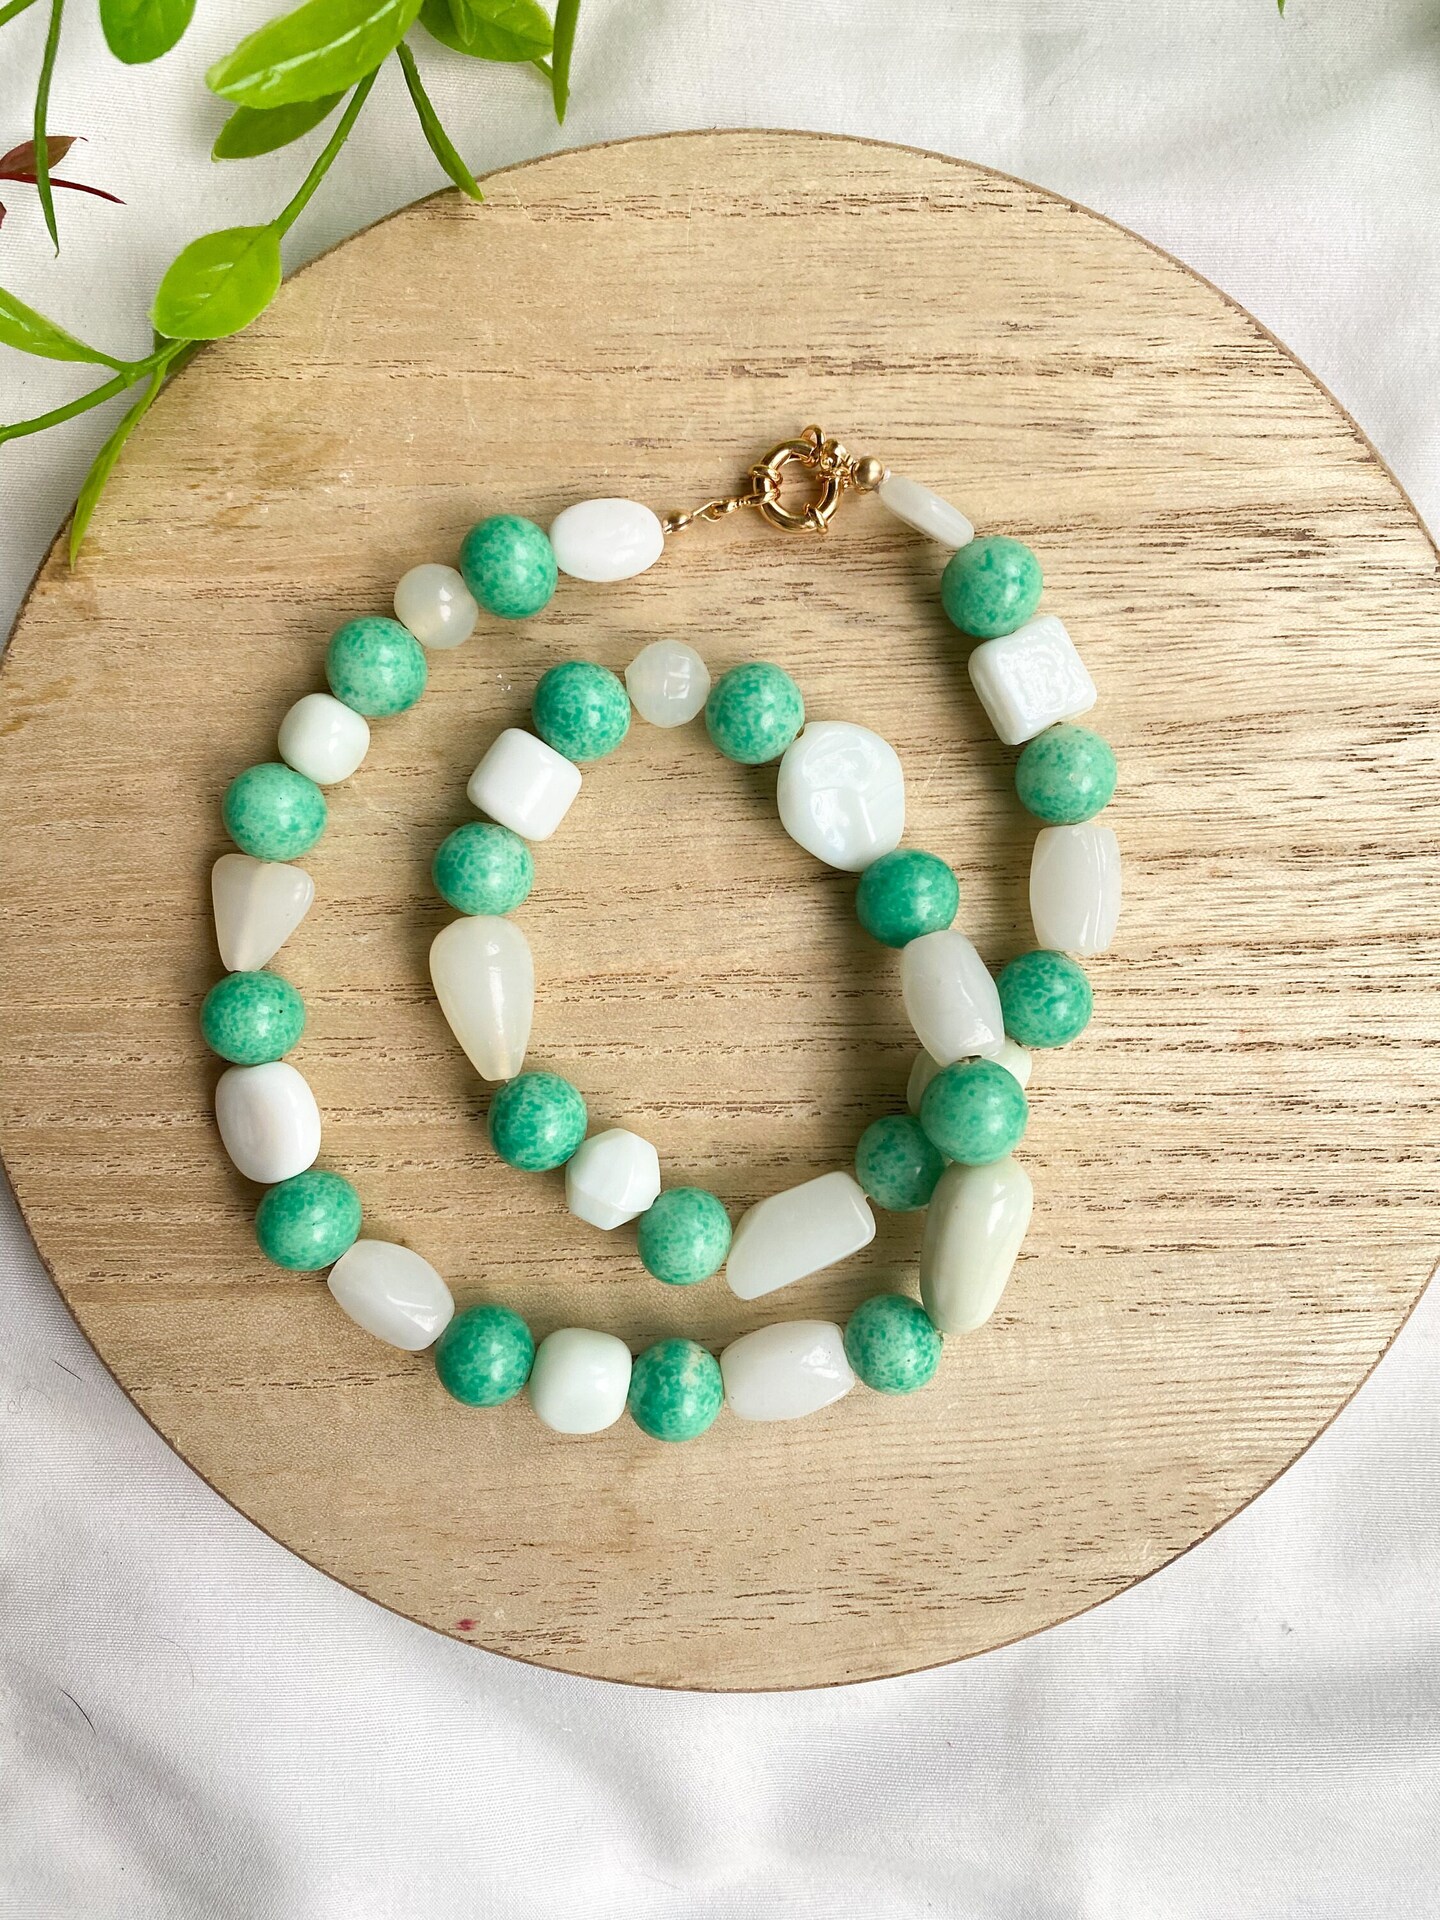 Heart Pendant Necklace Chunky Glass Puffy Love Heart Beaded Necklace Y2K  Aesthetic Jewelry for Women Girl - green - Walmart.com